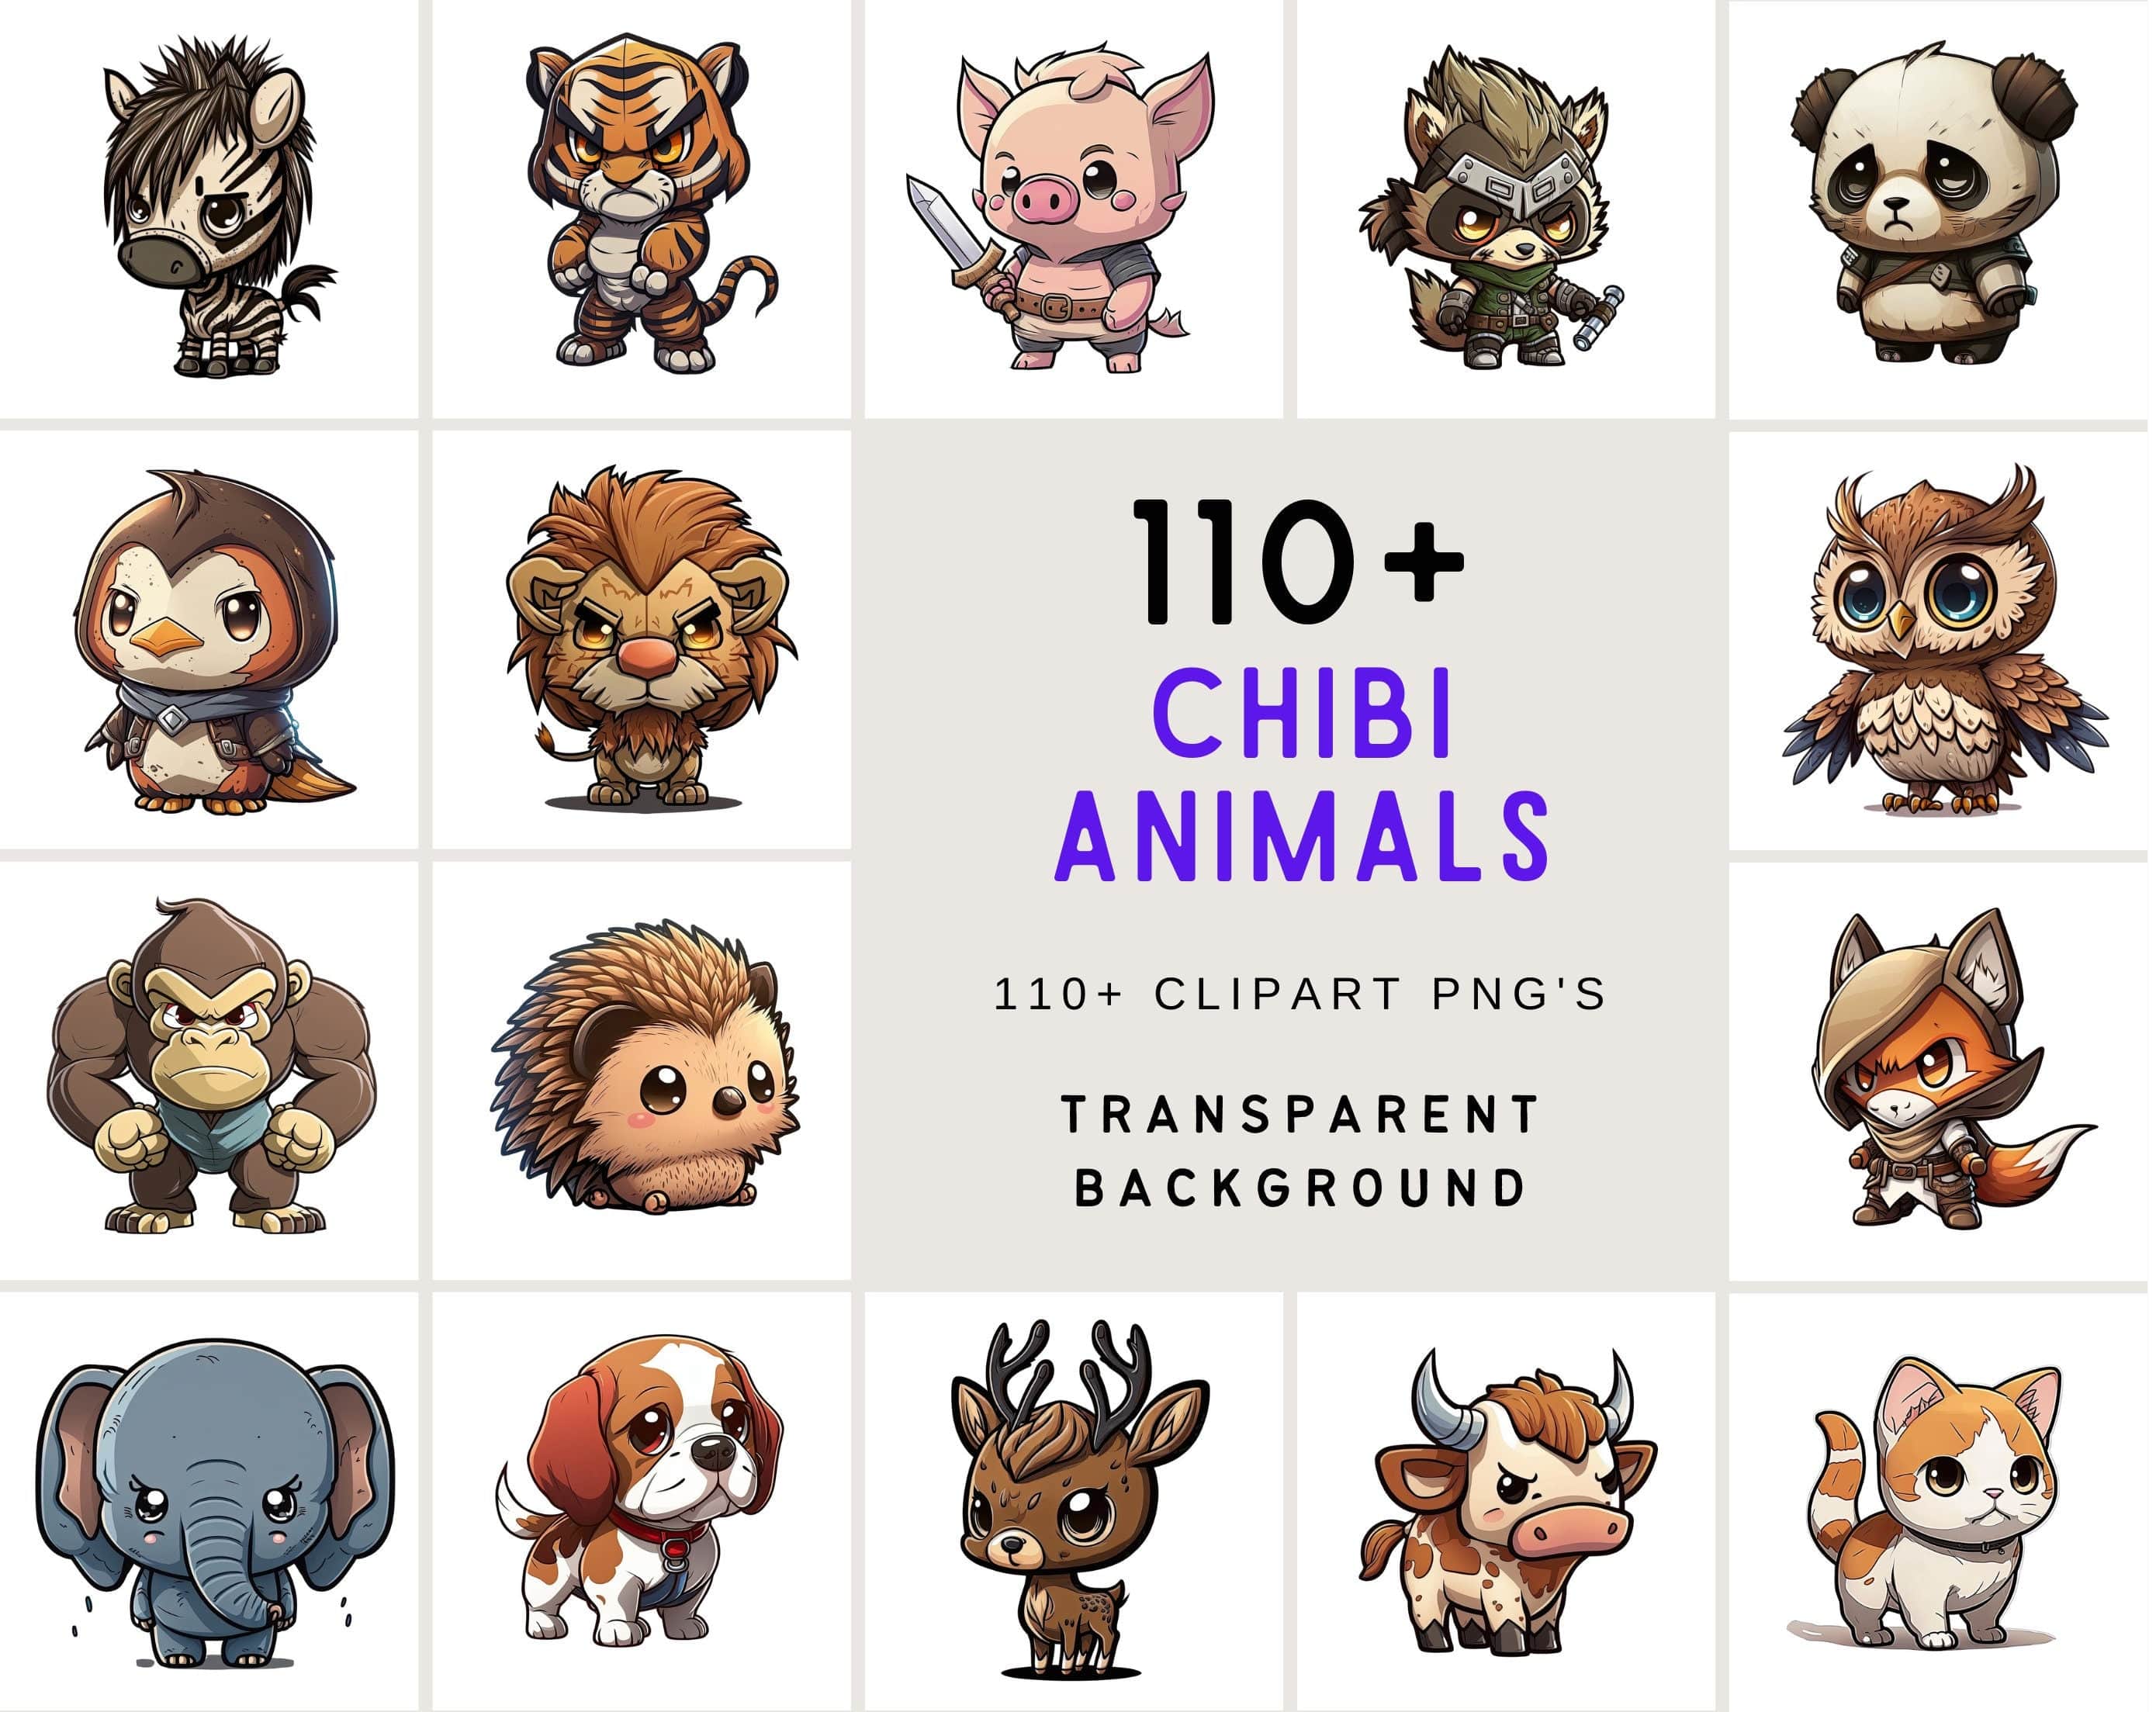 117 Adorable Chibi Animal Illustrations with Transparent Backgrounds - Perfect for Merchandise, Stickers, and Digital Art, Commercial Use Digital Download Sumobundle